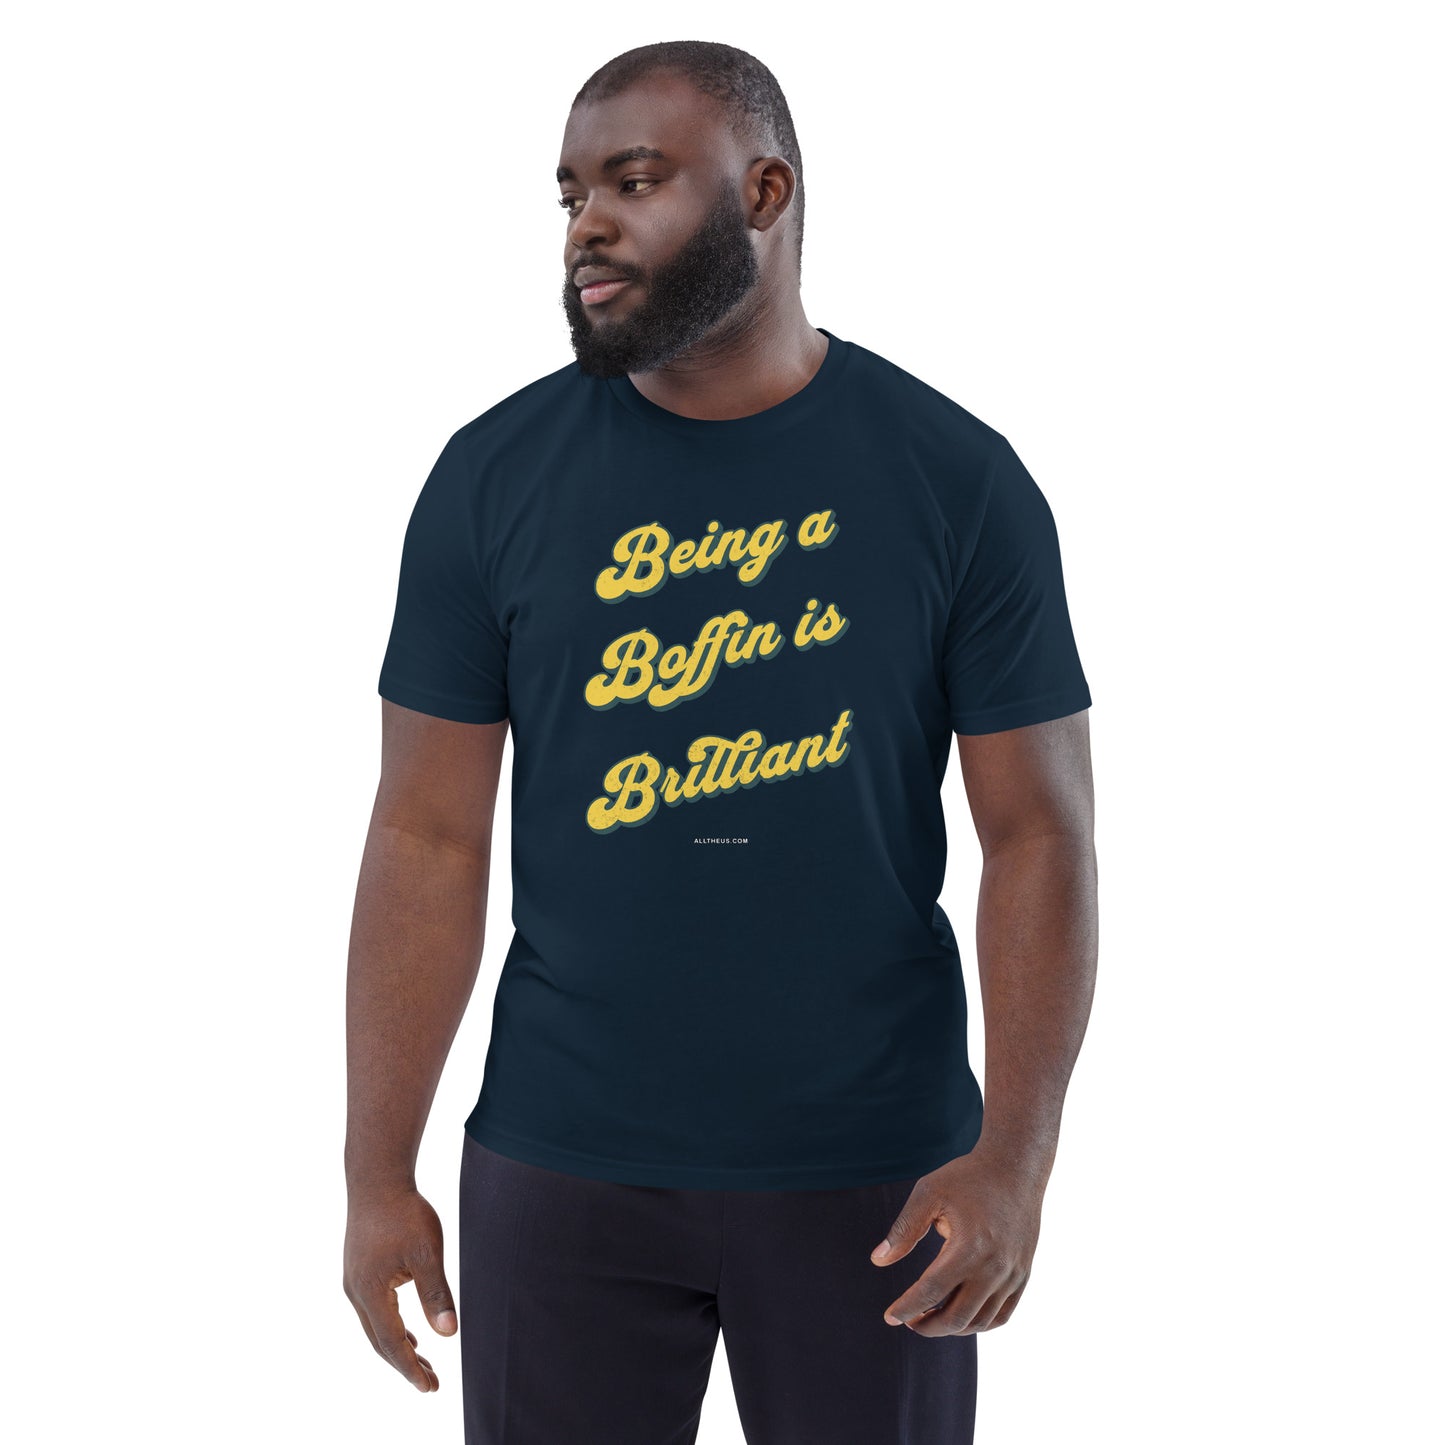 Unisex organic cotton t-shirt, Being a Boffin Is Brilliant!